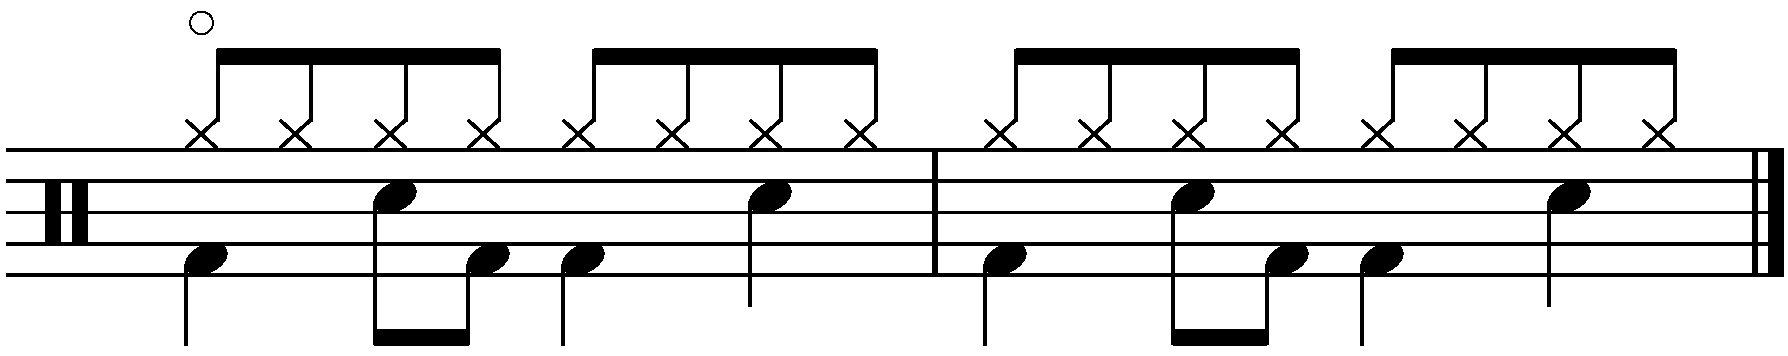 Examples of open hi hat notation